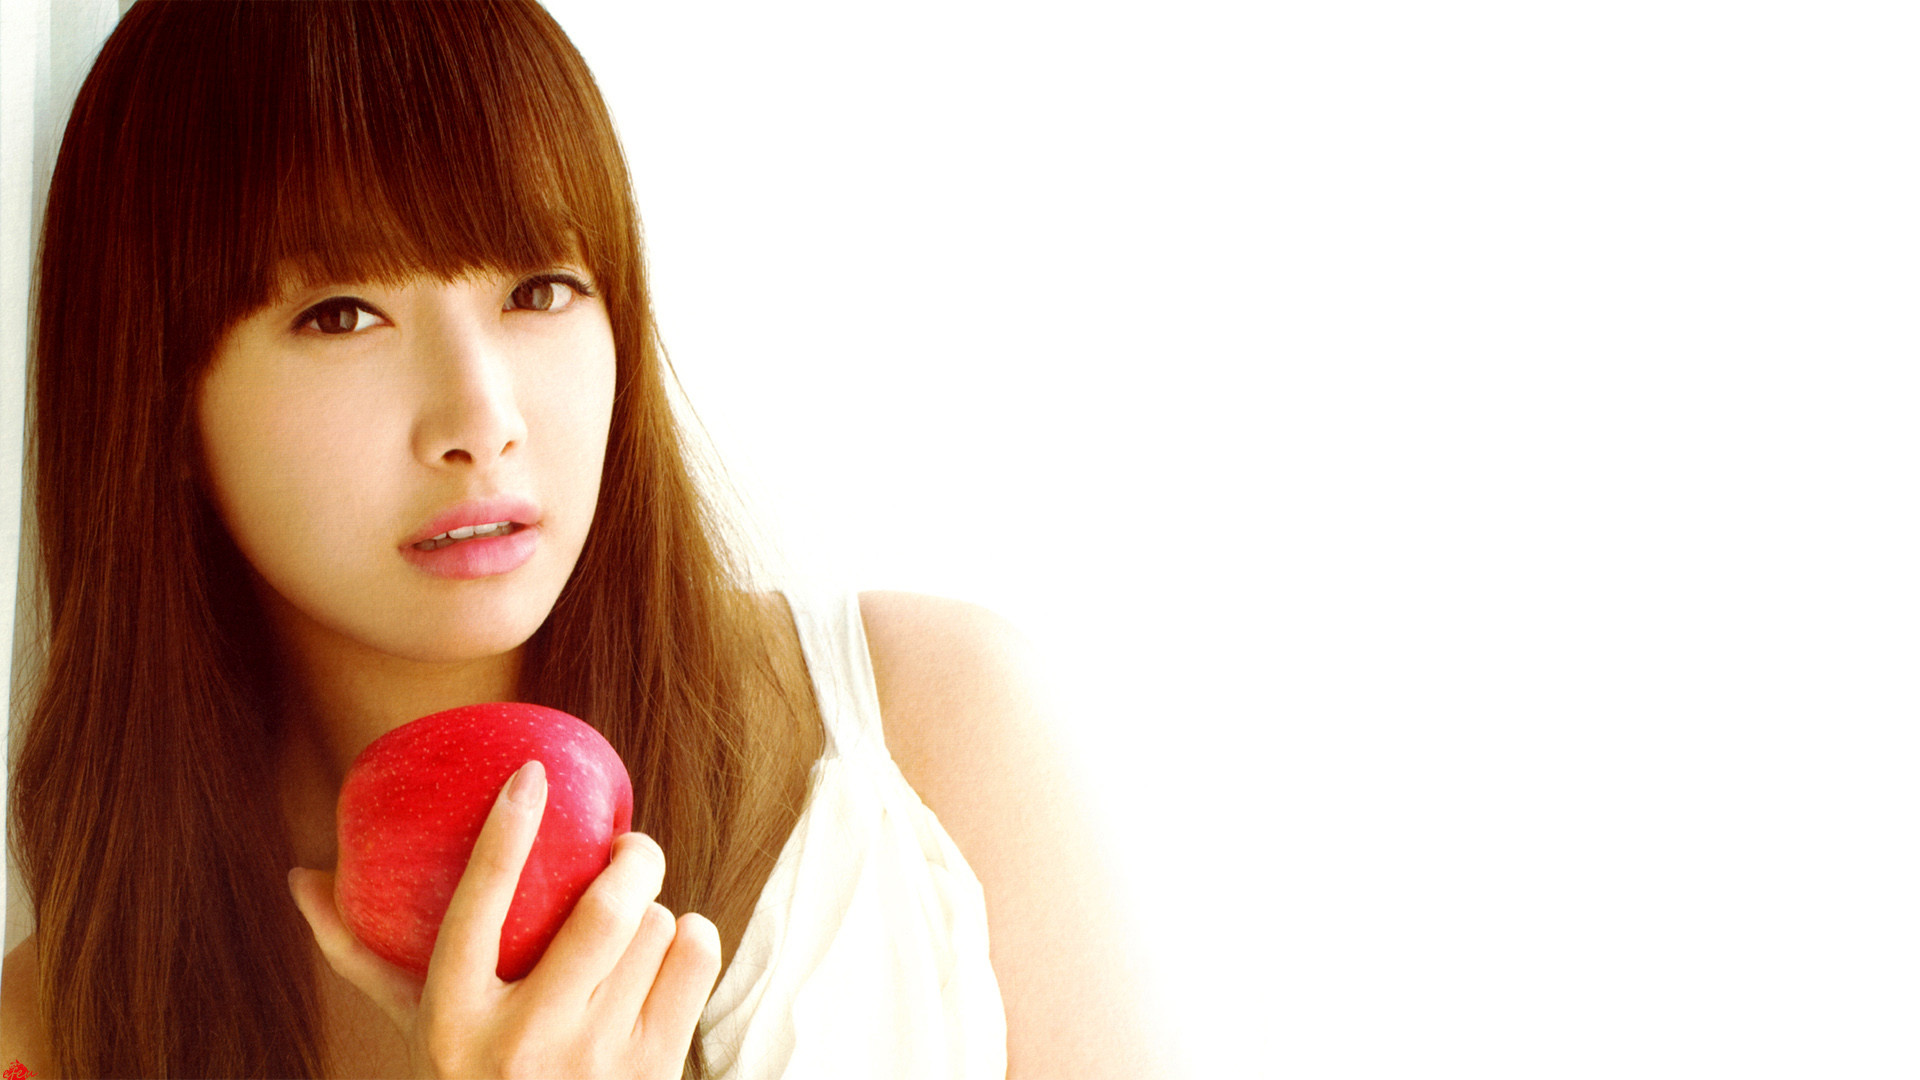 Victoria Song Backgrounds, Compatible - PC, Mobile, Gadgets| 1920x1080 px